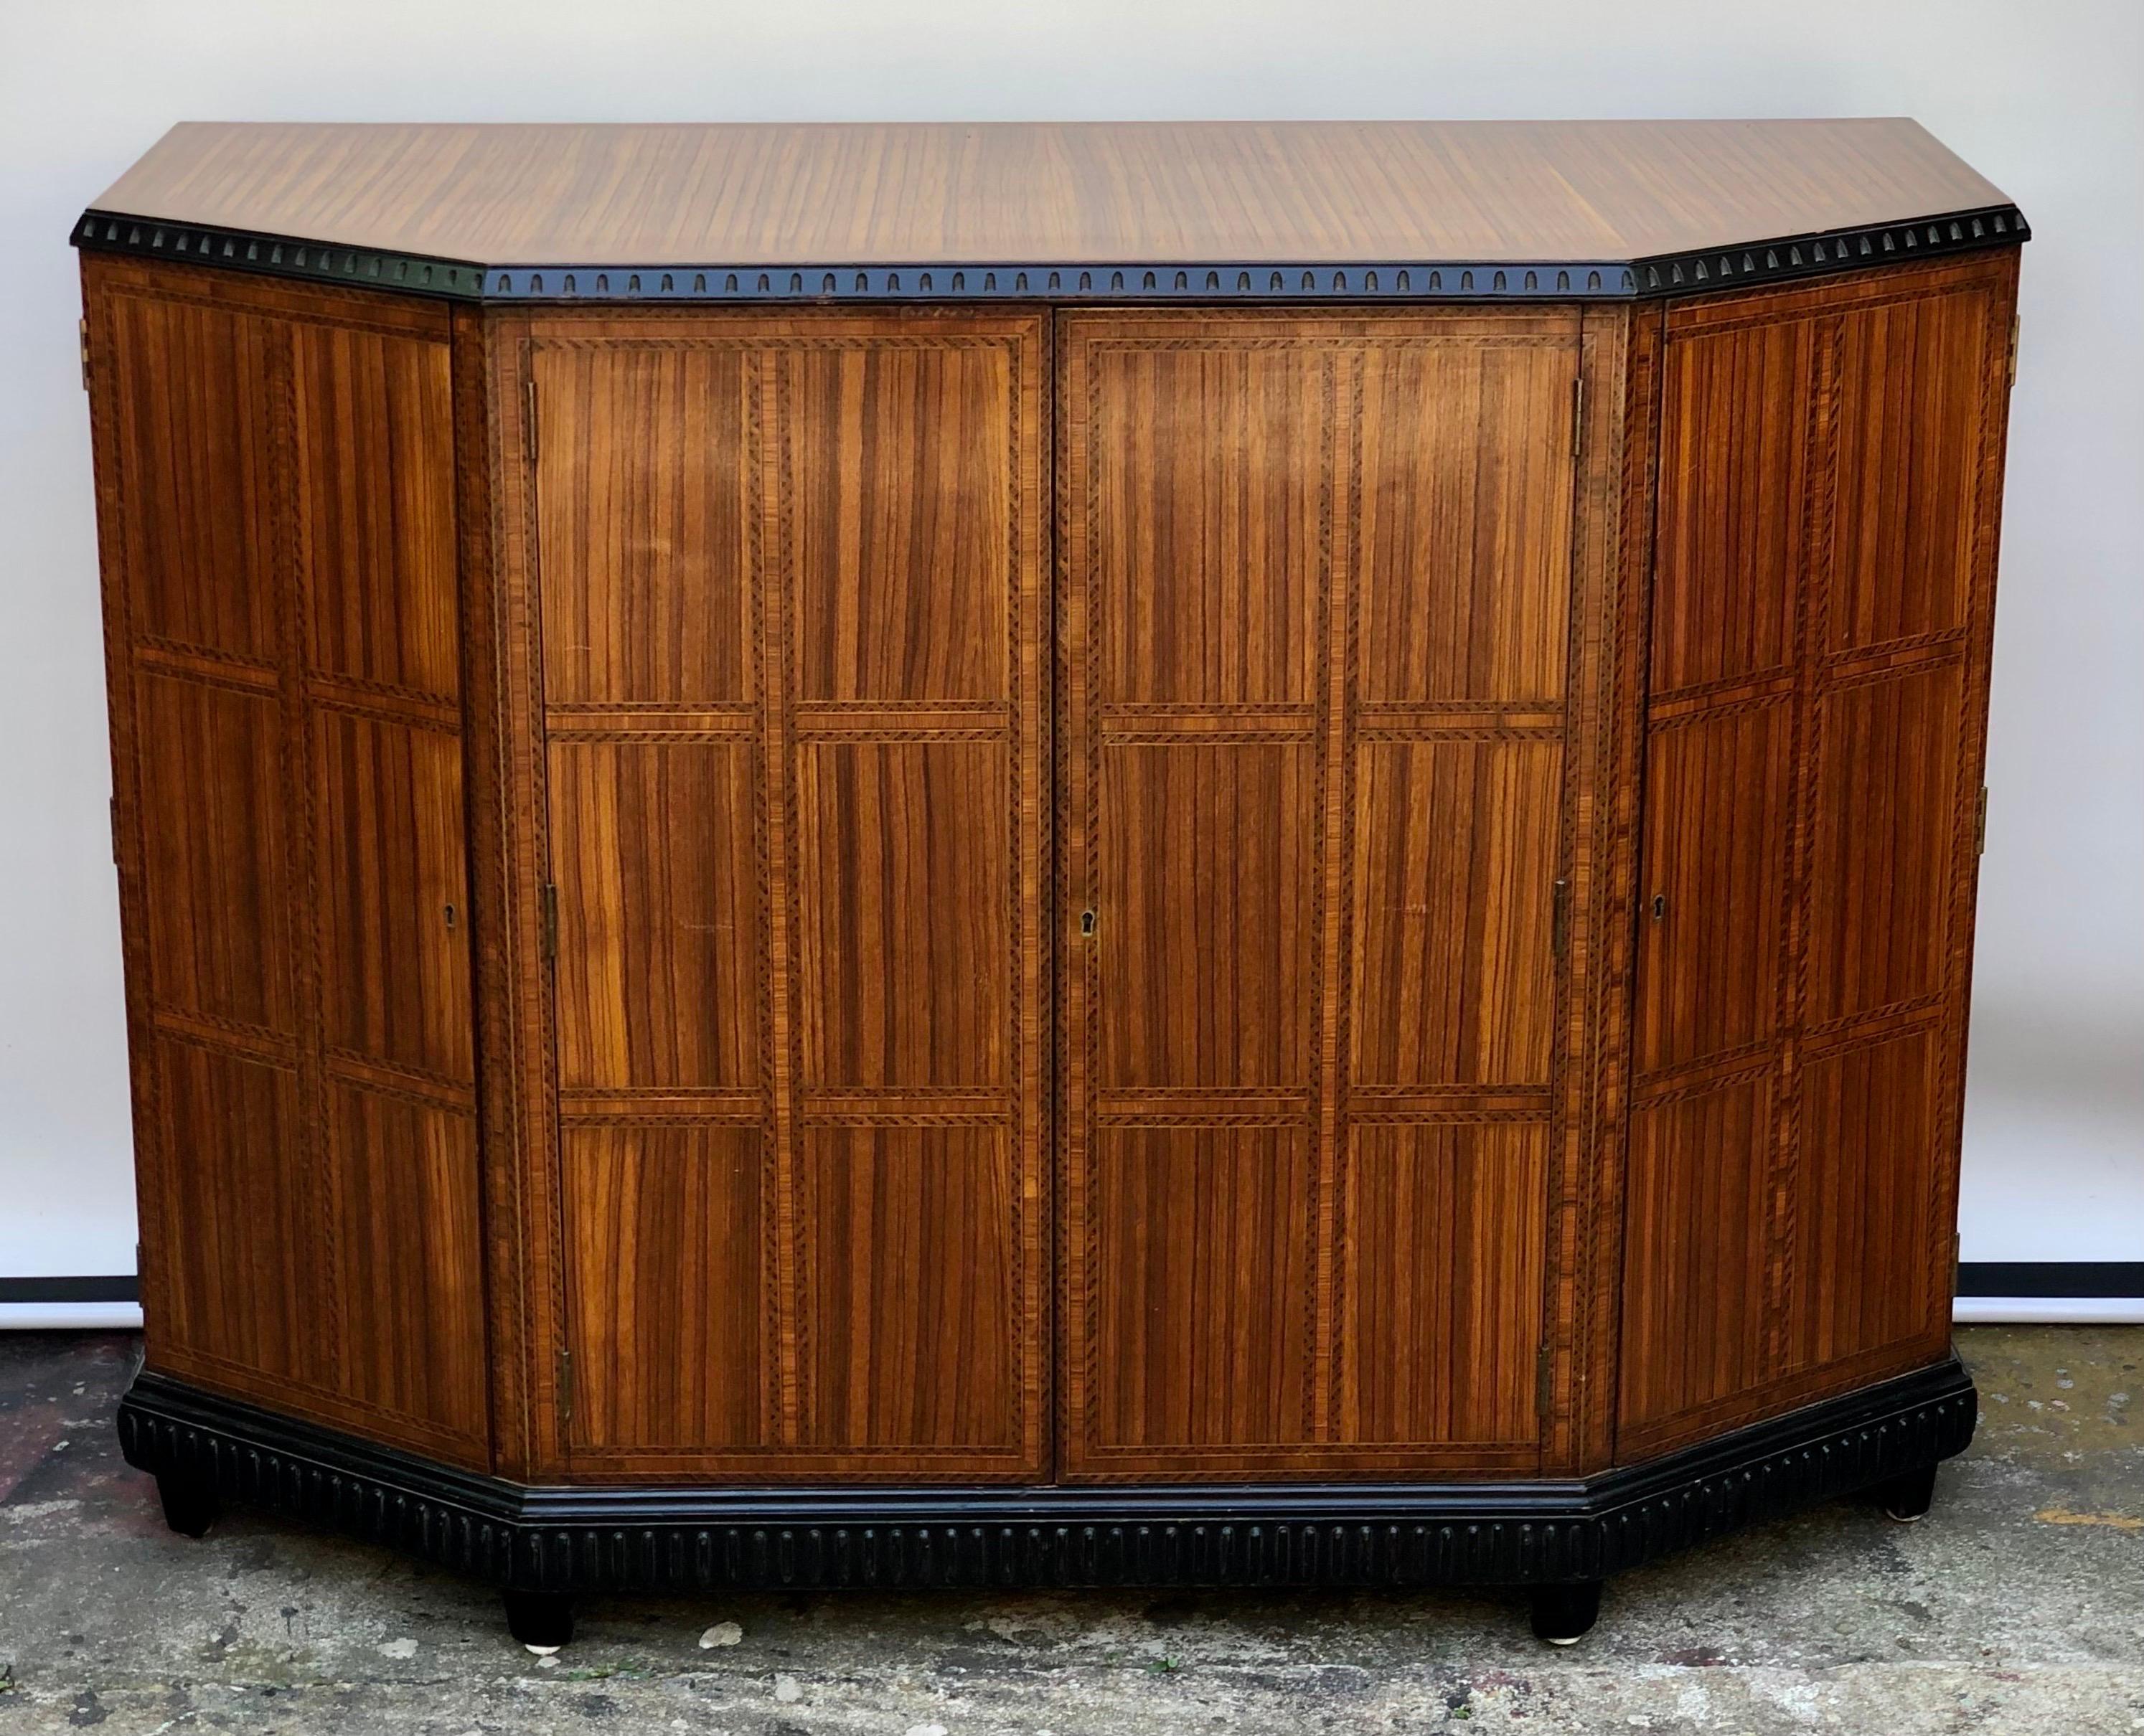 Exotic Art Deco Italian Zebra wood inlaid credenza was made in Italy in the early 20th century. This stunning Deco Credenza is a true work of art displaying exotic wood veneers of zebra wood, satinwood, and ebony. The beautiful inlay is framed